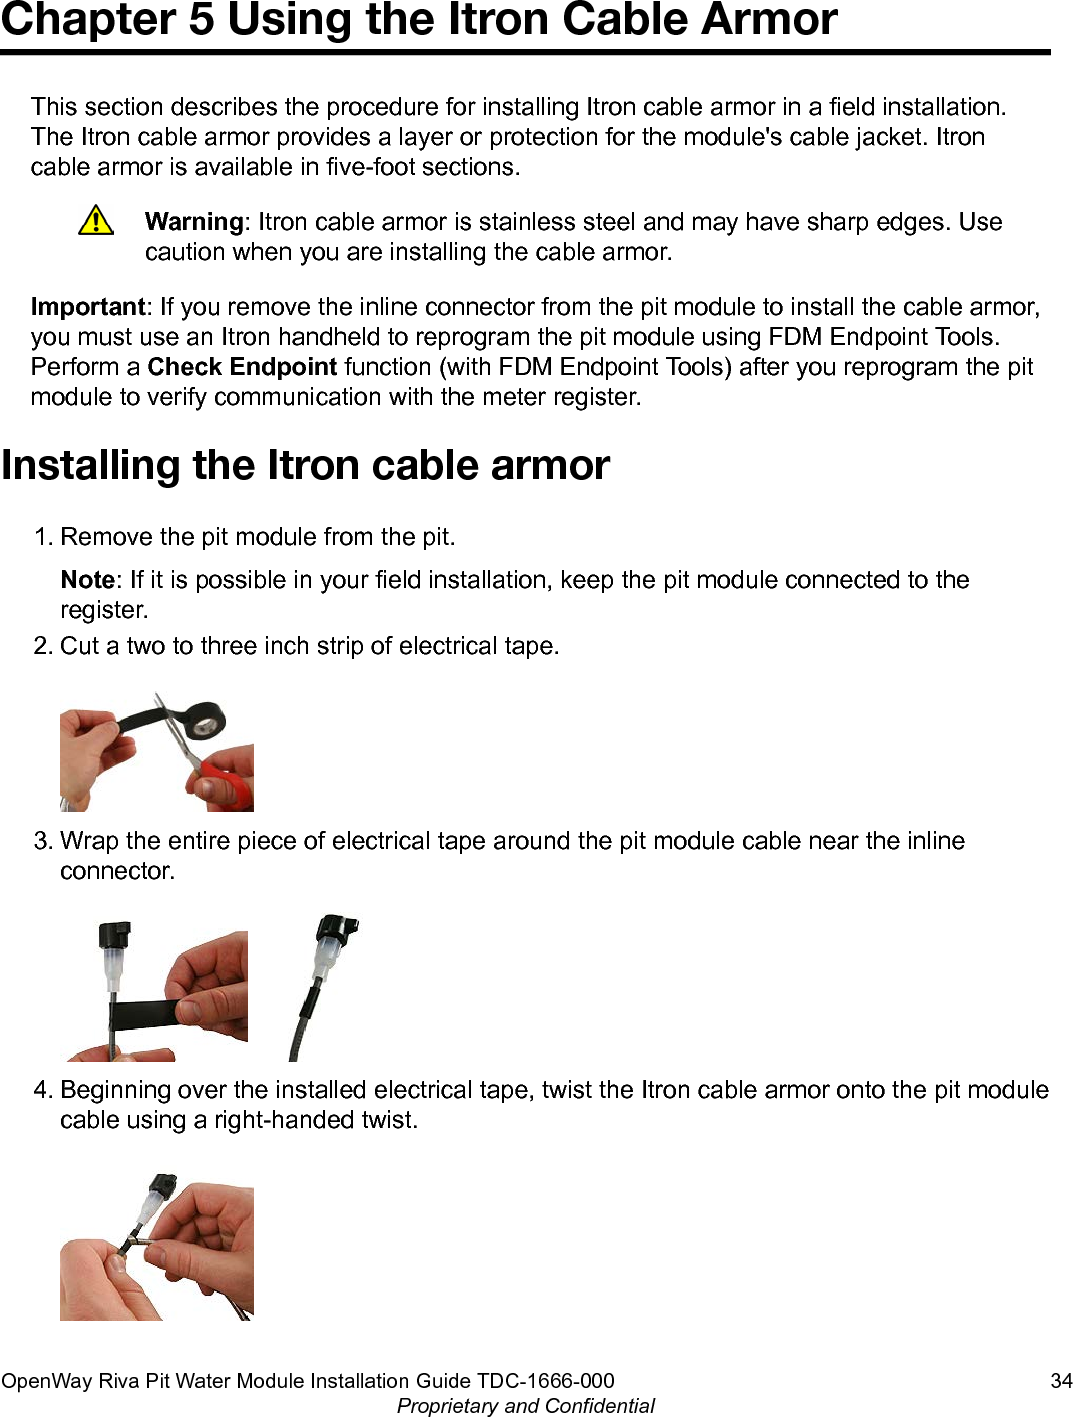 Chapter 5 Using the Itron Cable ArmorThis section describes the procedure for installing Itron cable armor in a field installation.The Itron cable armor provides a layer or protection for the module&apos;s cable jacket. Itroncable armor is available in five-foot sections.Warning: Itron cable armor is stainless steel and may have sharp edges. Usecaution when you are installing the cable armor.Important: If you remove the inline connector from the pit module to install the cable armor,you must use an Itron handheld to reprogram the pit module using FDM Endpoint Tools.Perform a Check Endpoint function (with FDM Endpoint Tools) after you reprogram the pitmodule to verify communication with the meter register.Installing the Itron cable armor1. Remove the pit module from the pit.Note: If it is possible in your field installation, keep the pit module connected to theregister.2. Cut a two to three inch strip of electrical tape.3. Wrap the entire piece of electrical tape around the pit module cable near the inlineconnector. 4. Beginning over the installed electrical tape, twist the Itron cable armor onto the pit modulecable using a right-handed twist.OpenWay Riva Pit Water Module Installation Guide TDC-1666-000 34Proprietary and Confidential